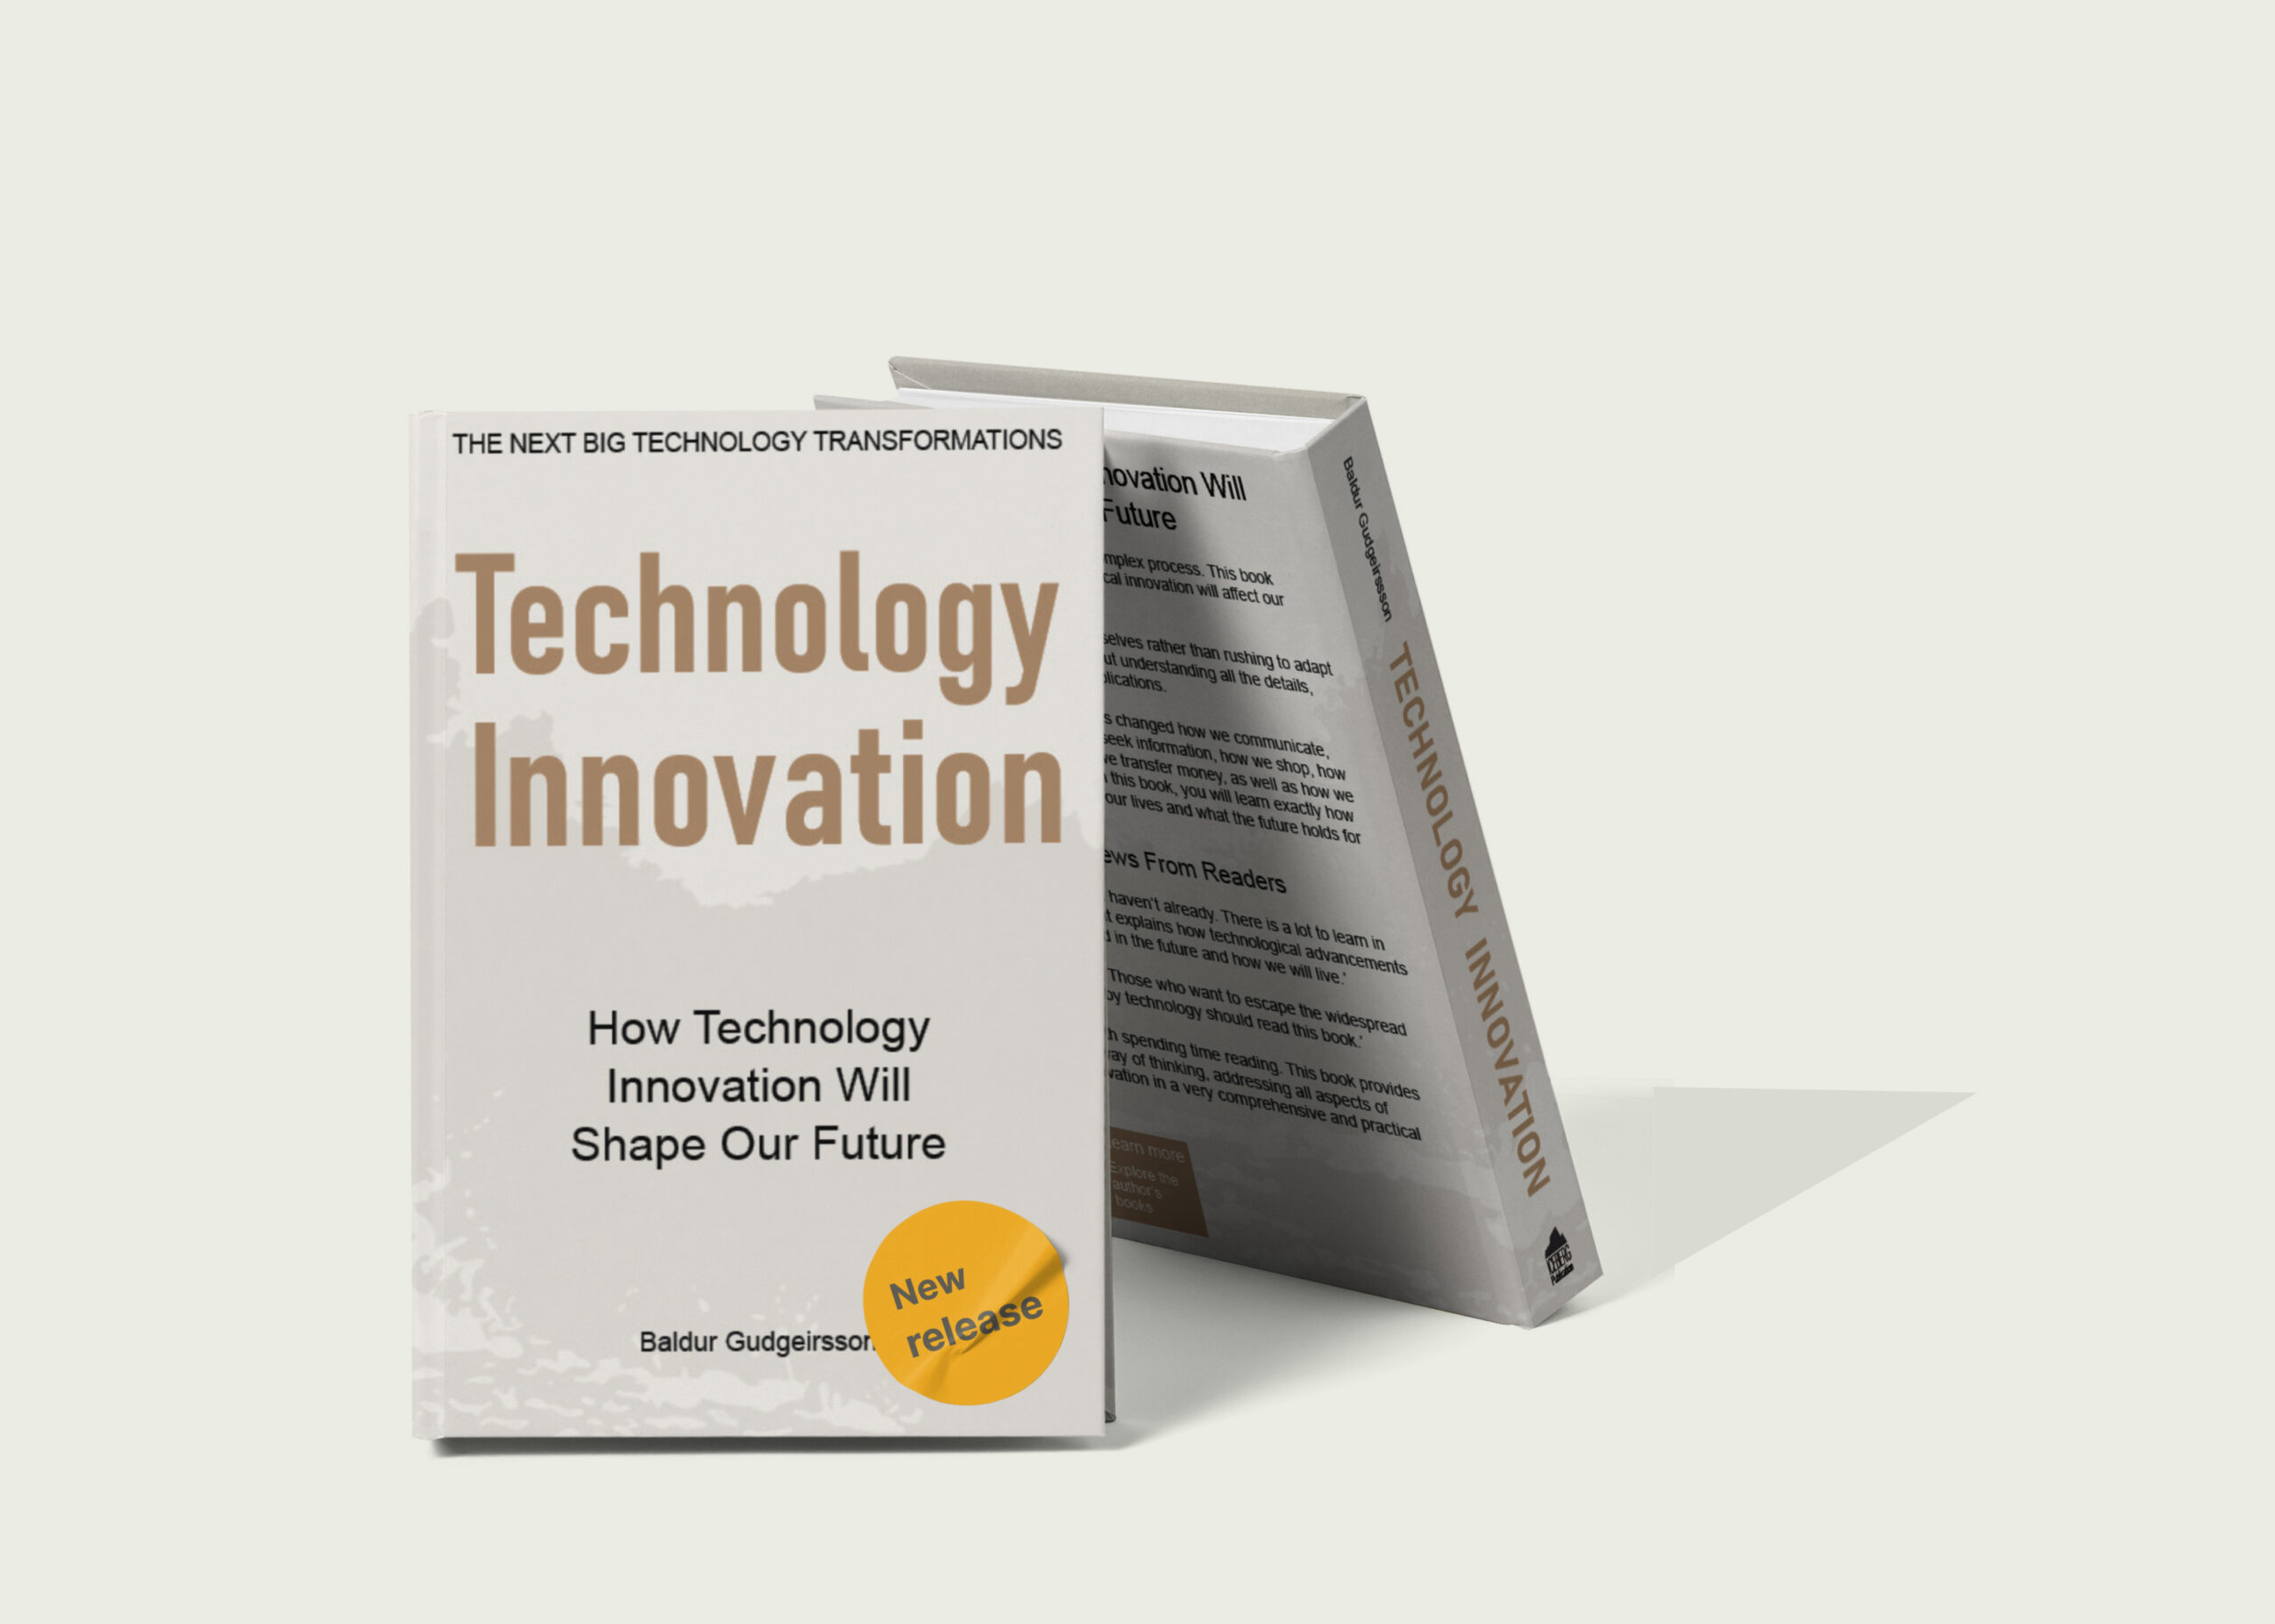 New Book Details How “How Technology Innovation Will Shape Our Future”